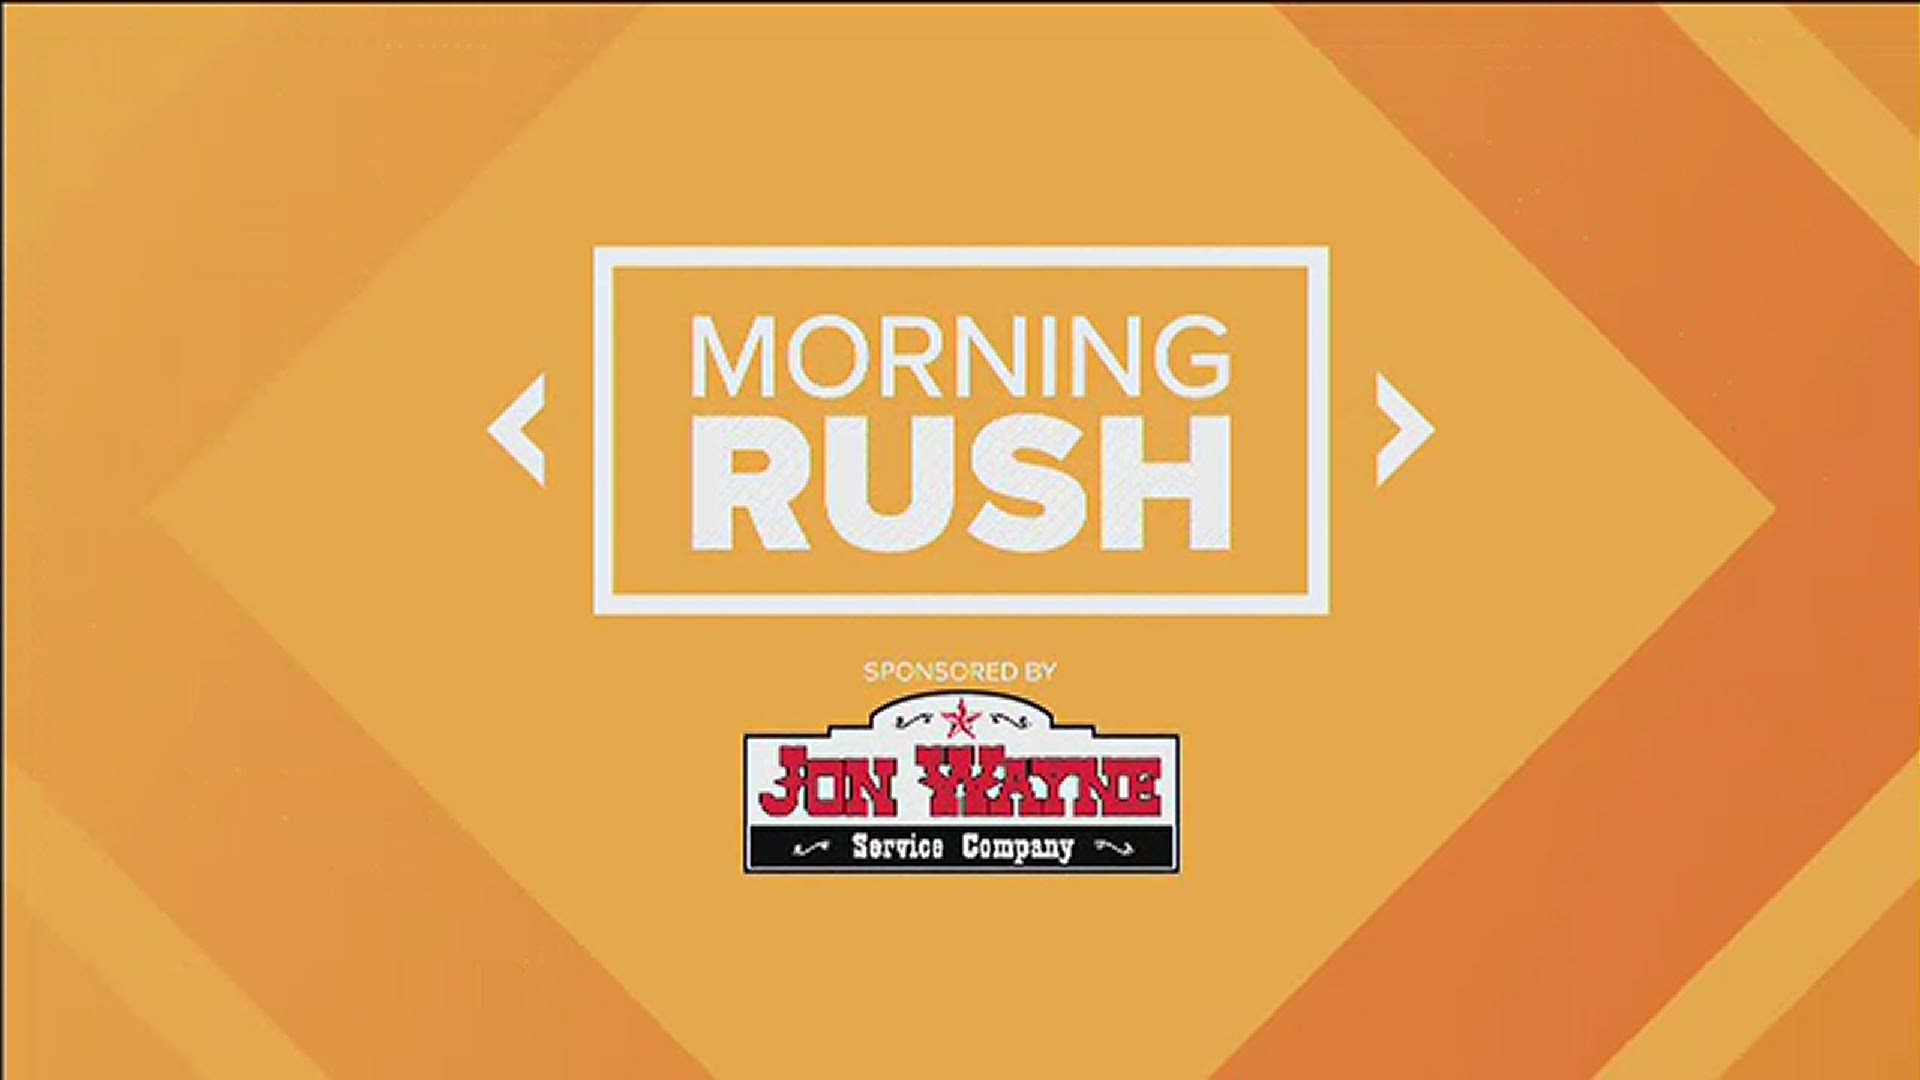 Tim Duncan Hall of Fame ceremony, National Selena Day and other top stories in today's Morning Rush.